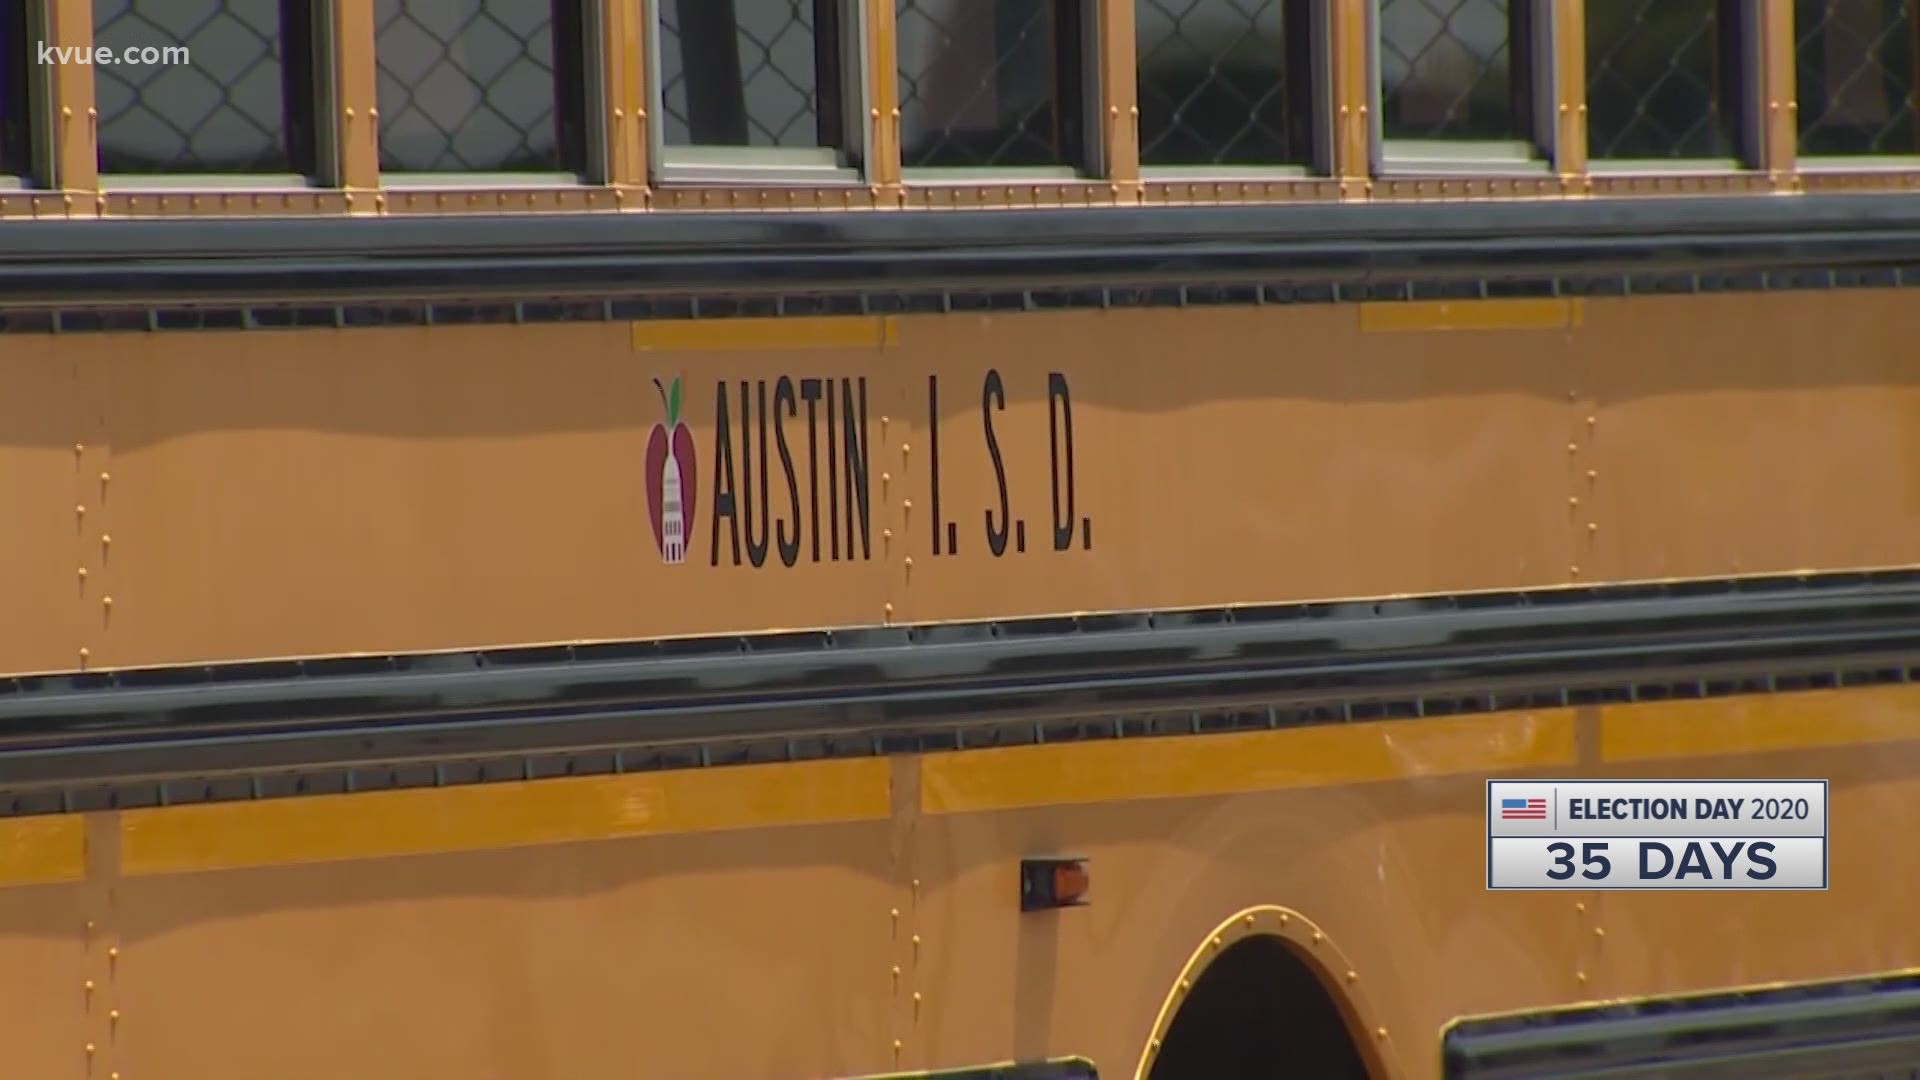 Election Day is now a holiday for Austin ISD students.